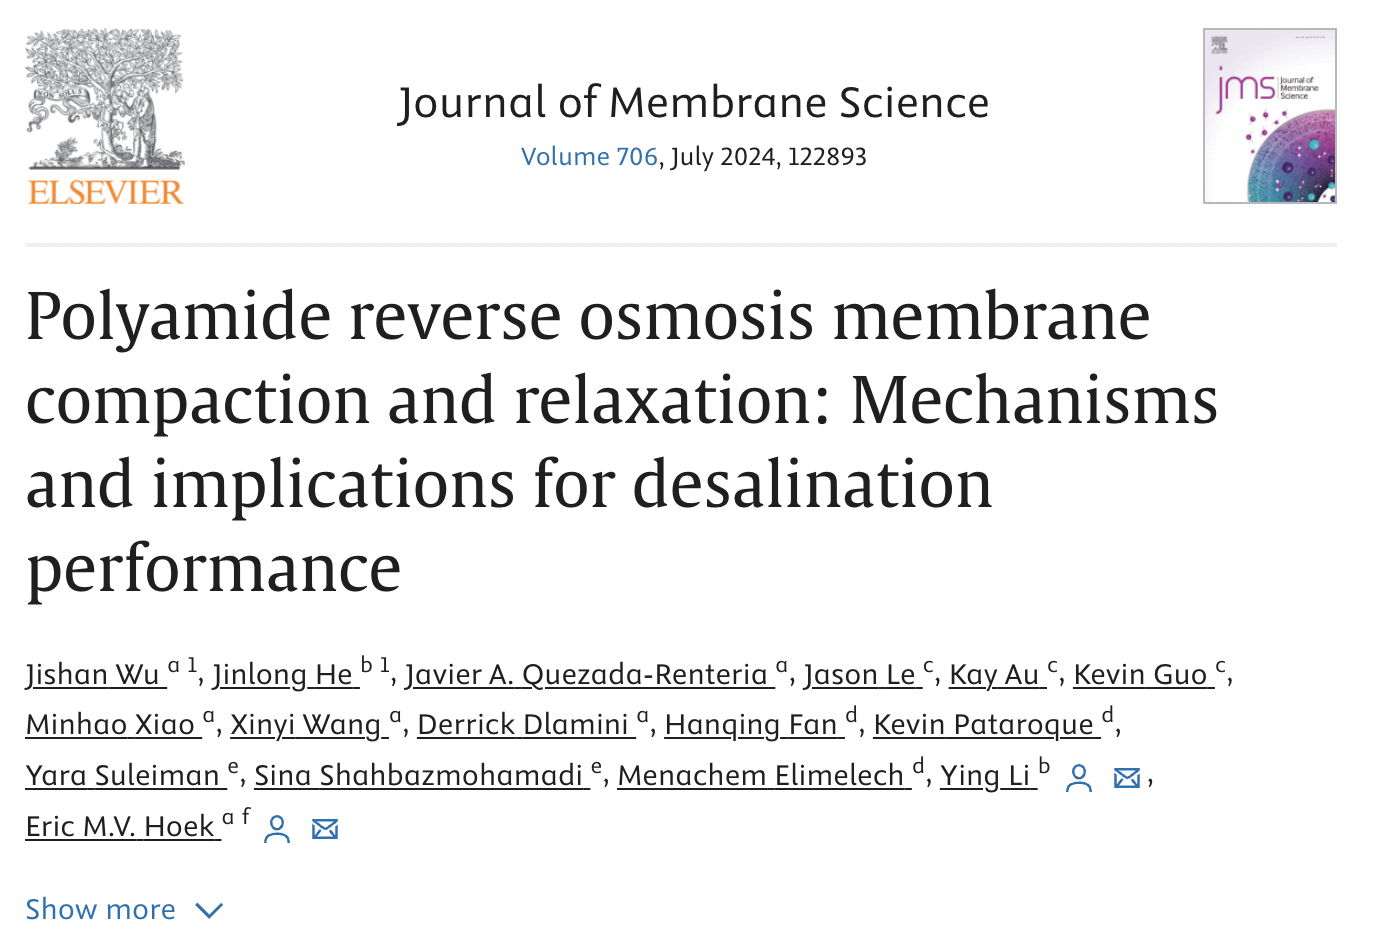 Polyamide reverse osmosis membrane compaction and relaxation